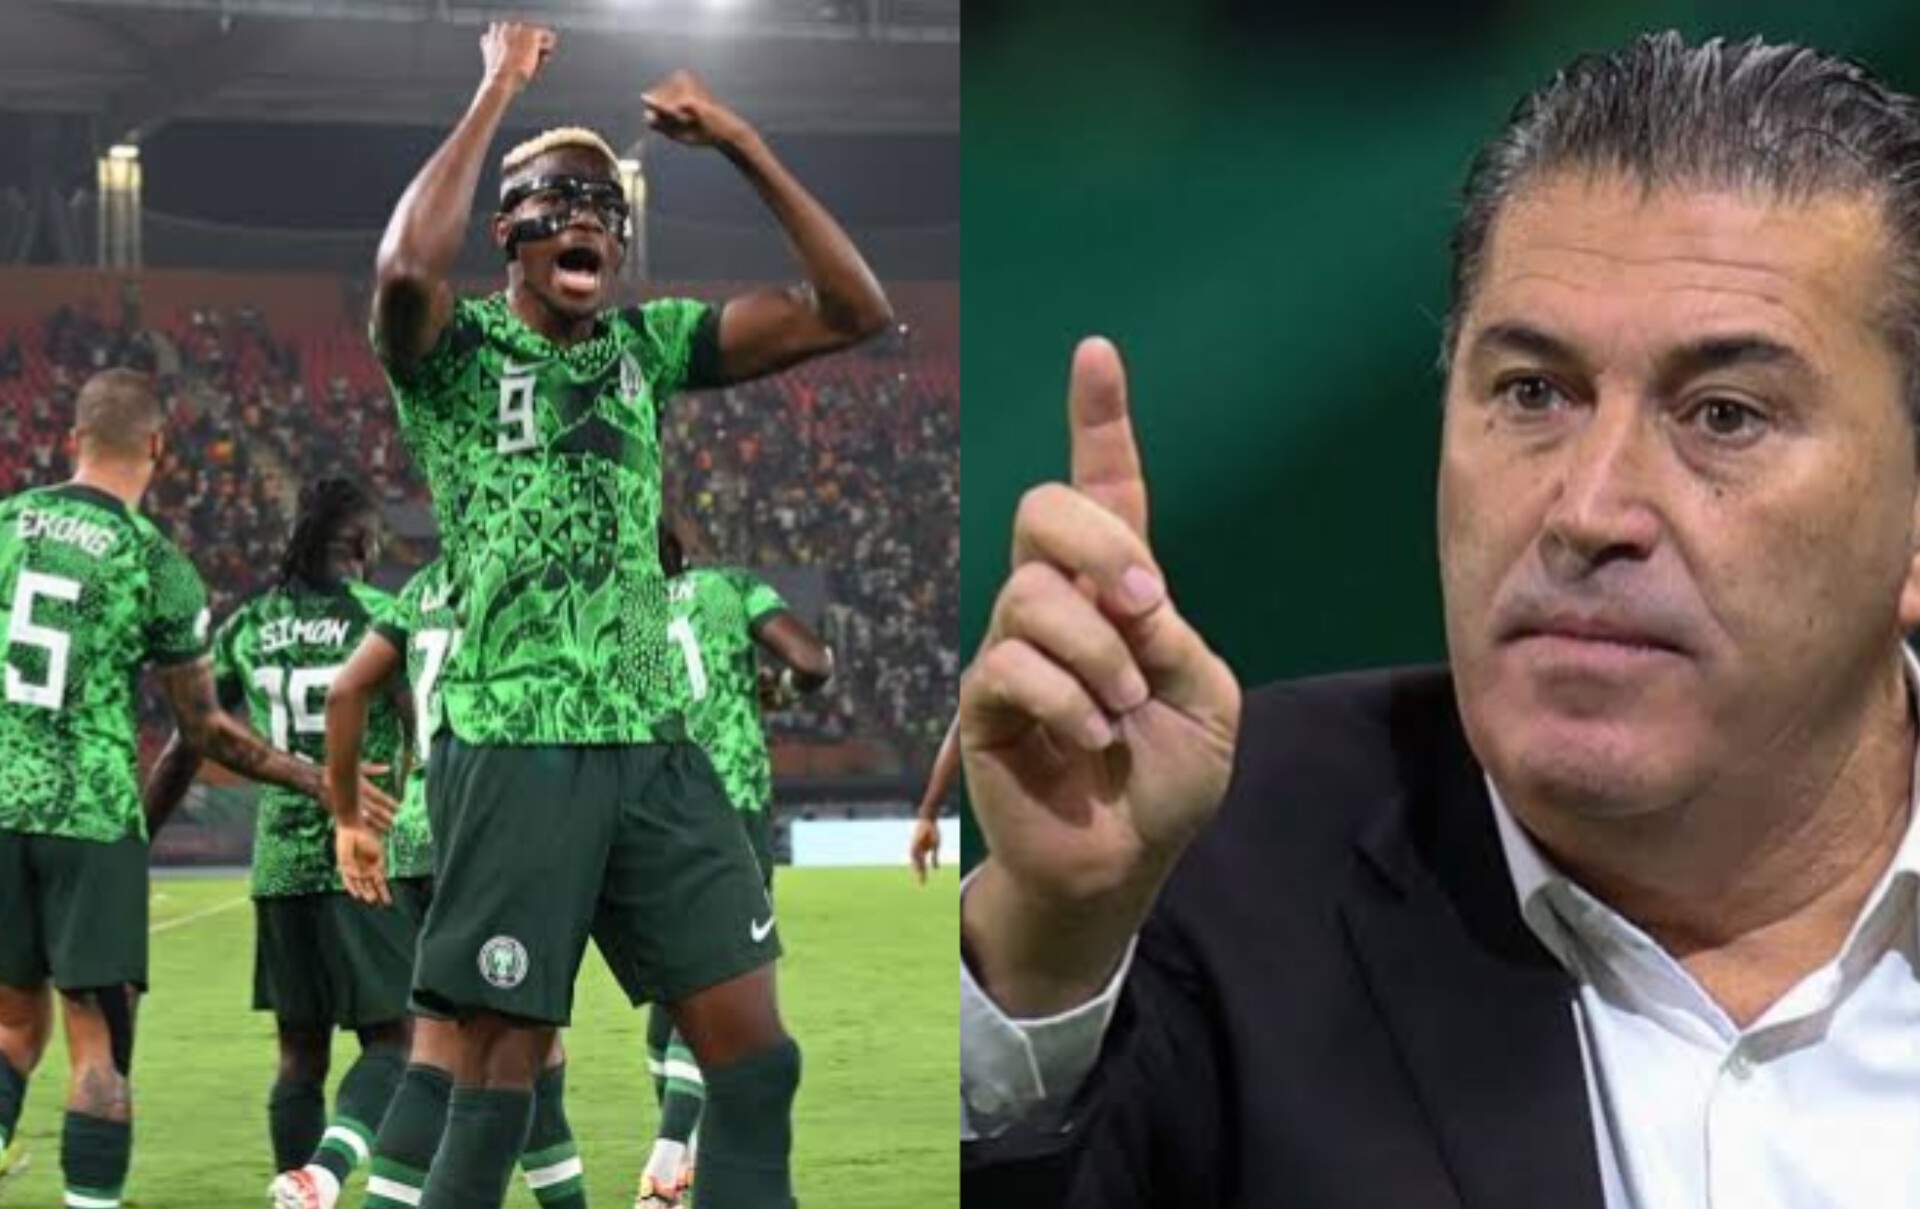 AFCON Alert: Coach Jose Peseiro Warns Super Eagles Players to Avoid Entertaining Female Visitors